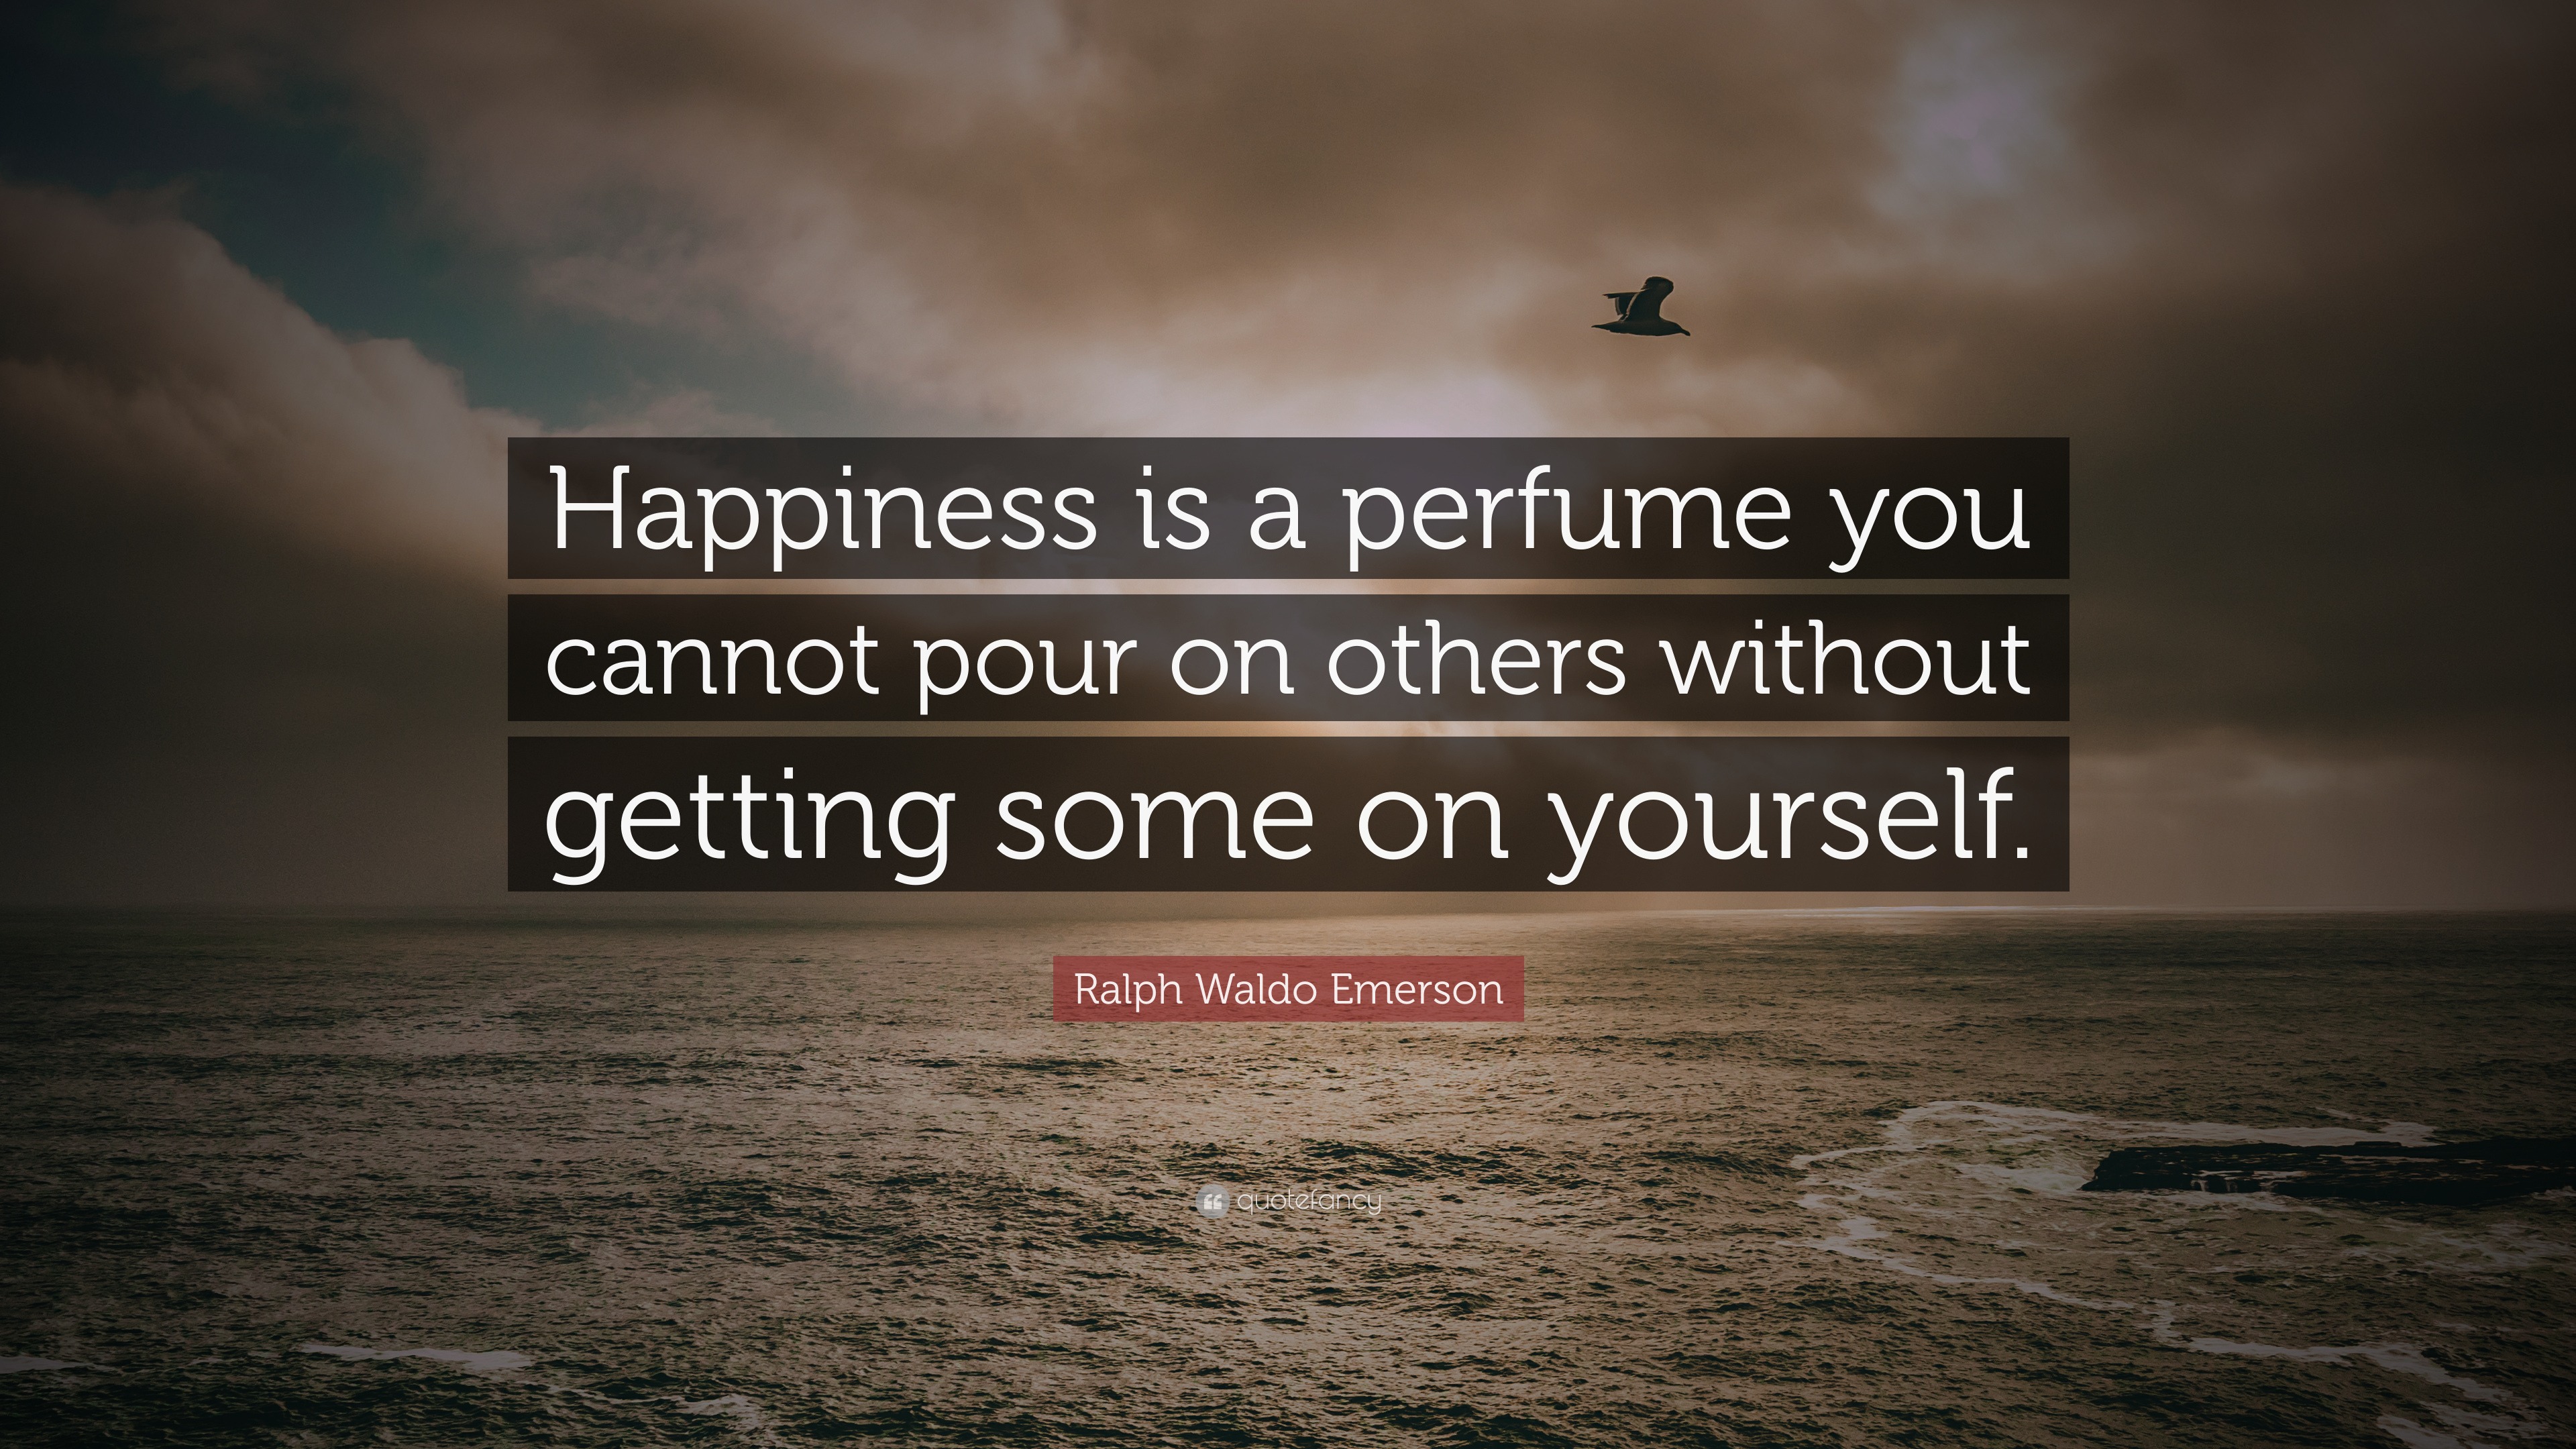 Ralph Waldo Emerson Quote: “Happiness is a perfume you cannot pour on ...